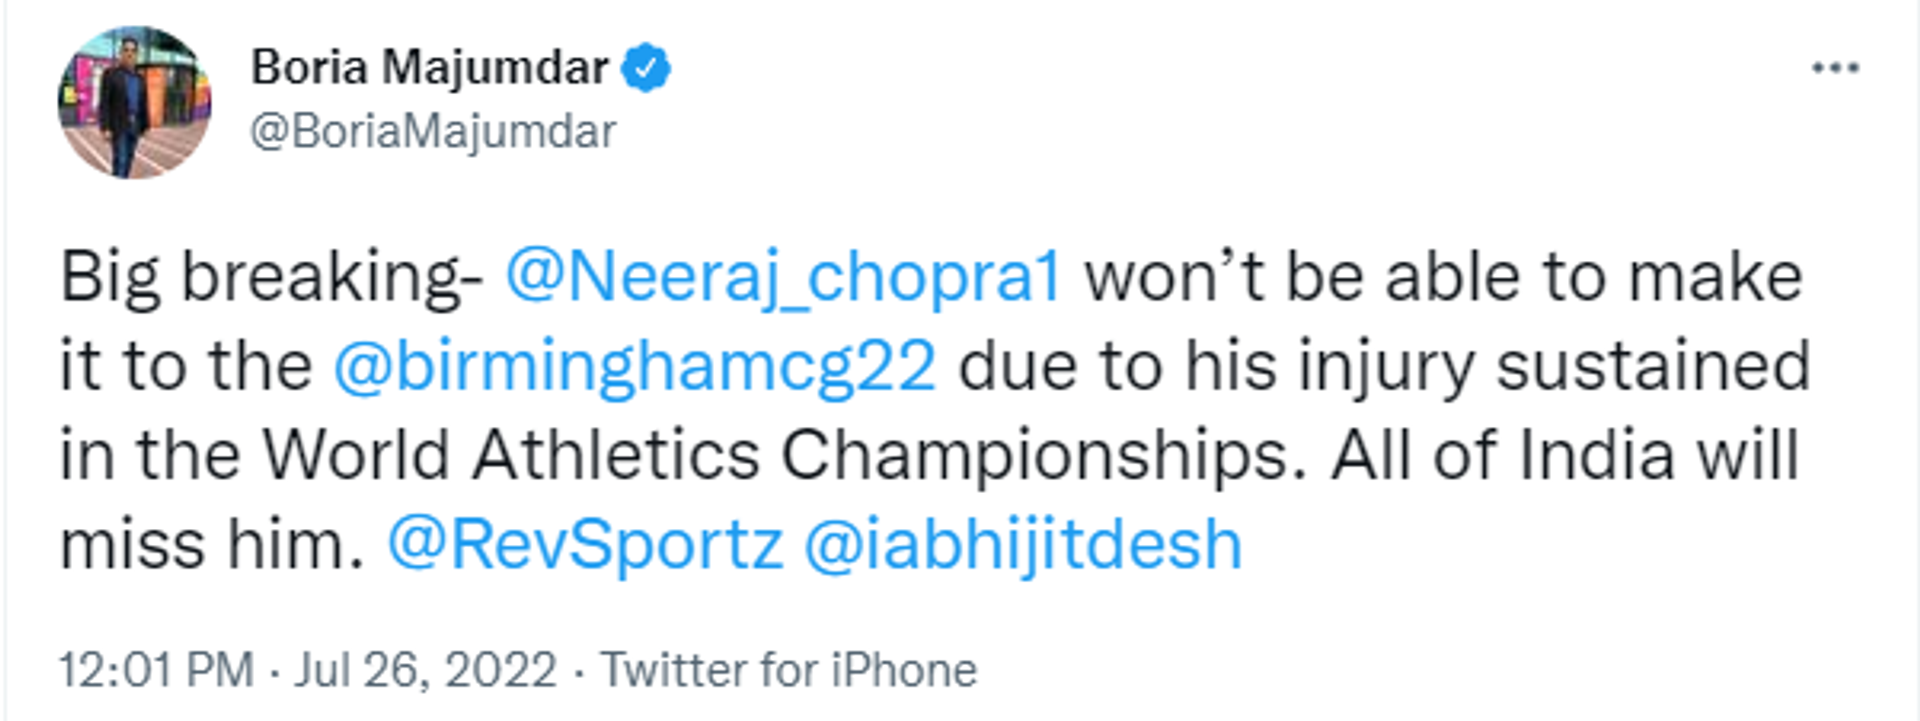 Netizens React to News about Neeraj Chopra Missing Out on Commonwealth Games 2022 - Sputnik International, 1920, 26.07.2022